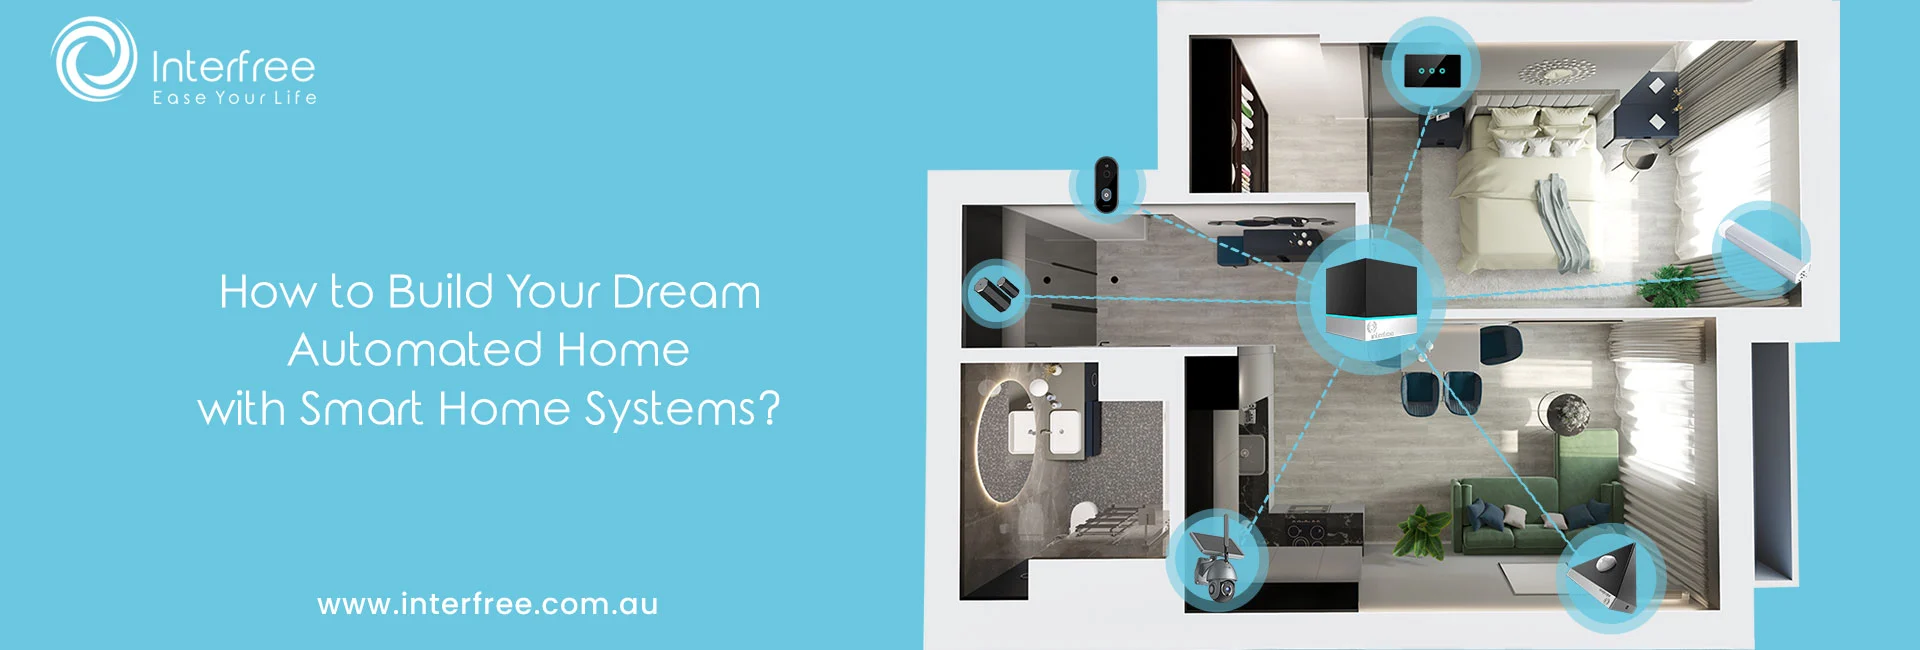 How to Build Your Dream Automated Home with Smart Home Systems?